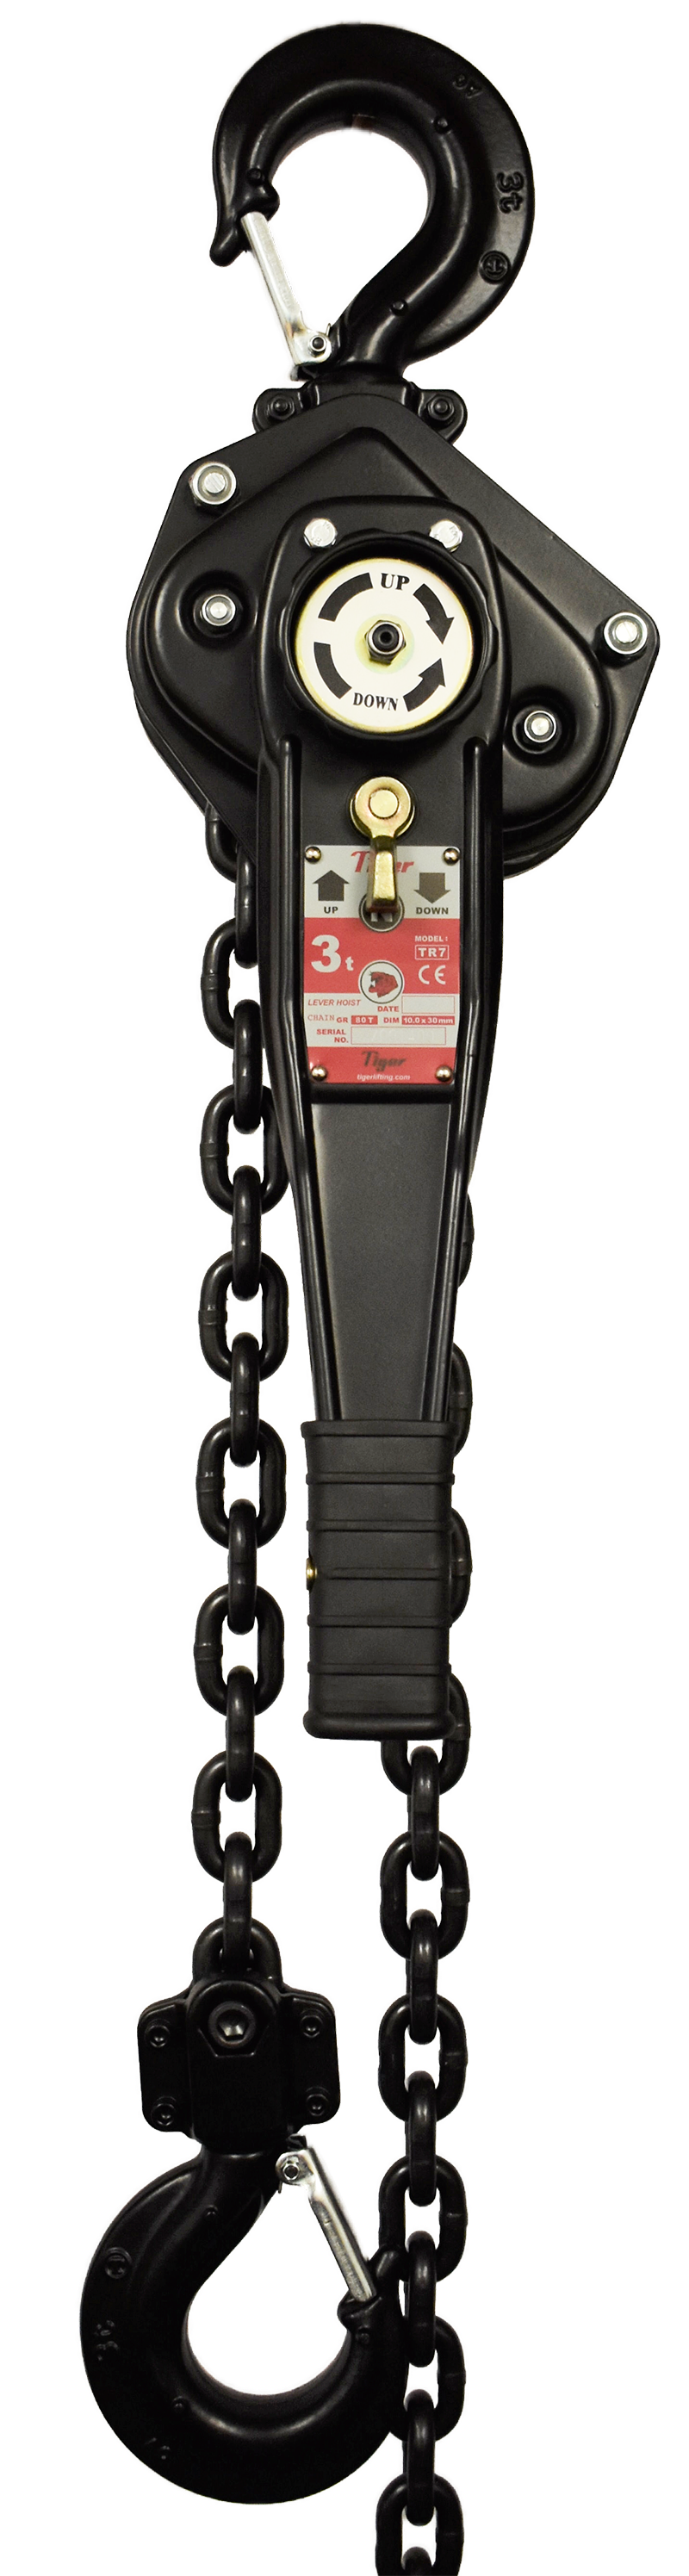 Tiger TR7 Industrial Lever Chain Hoists (1.5Mtrs HOL)